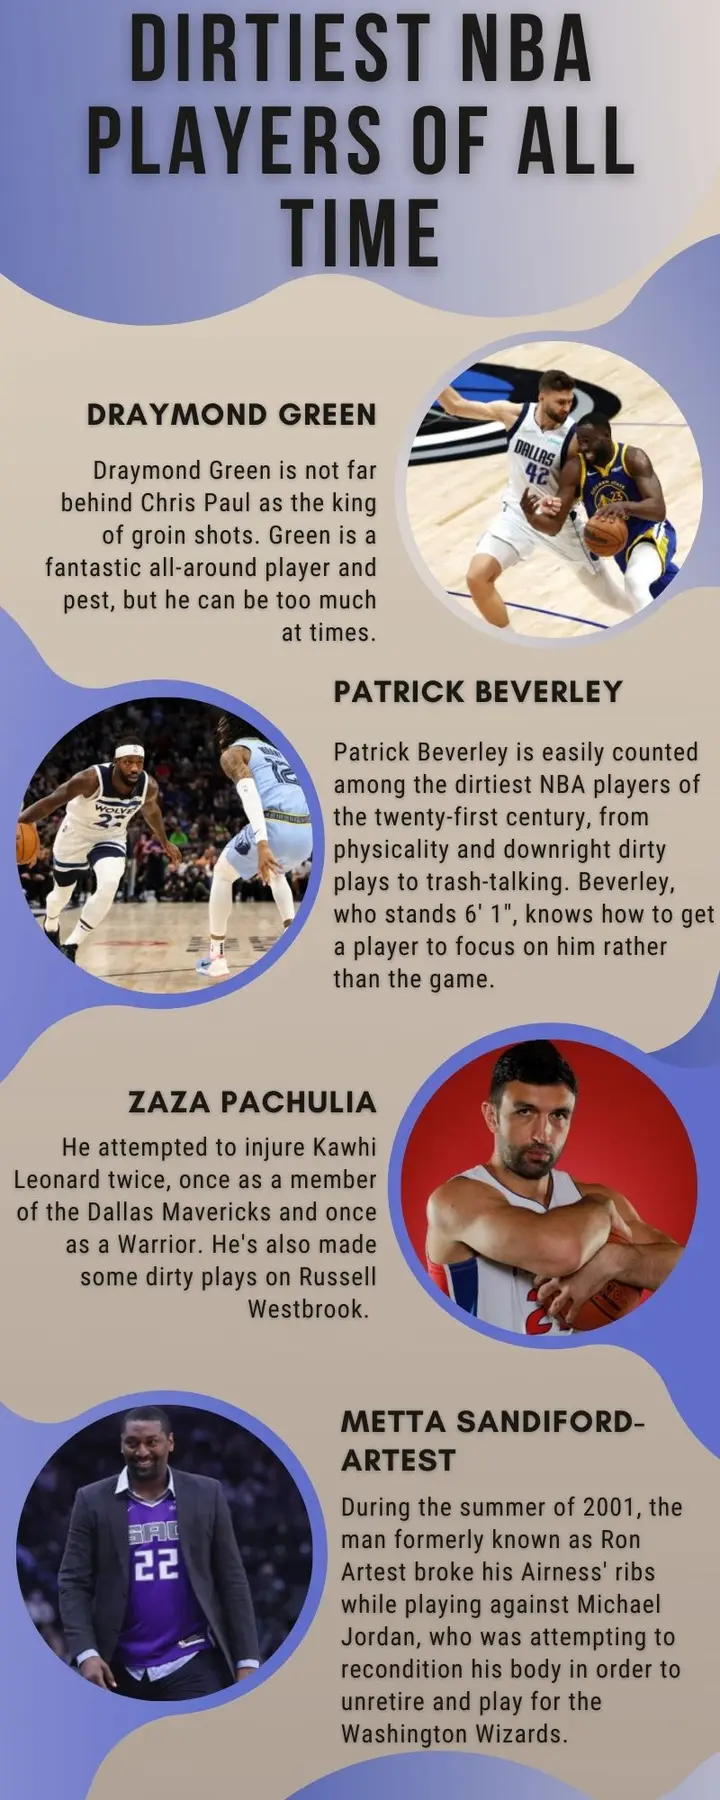 Dirtiest NBA players of all time